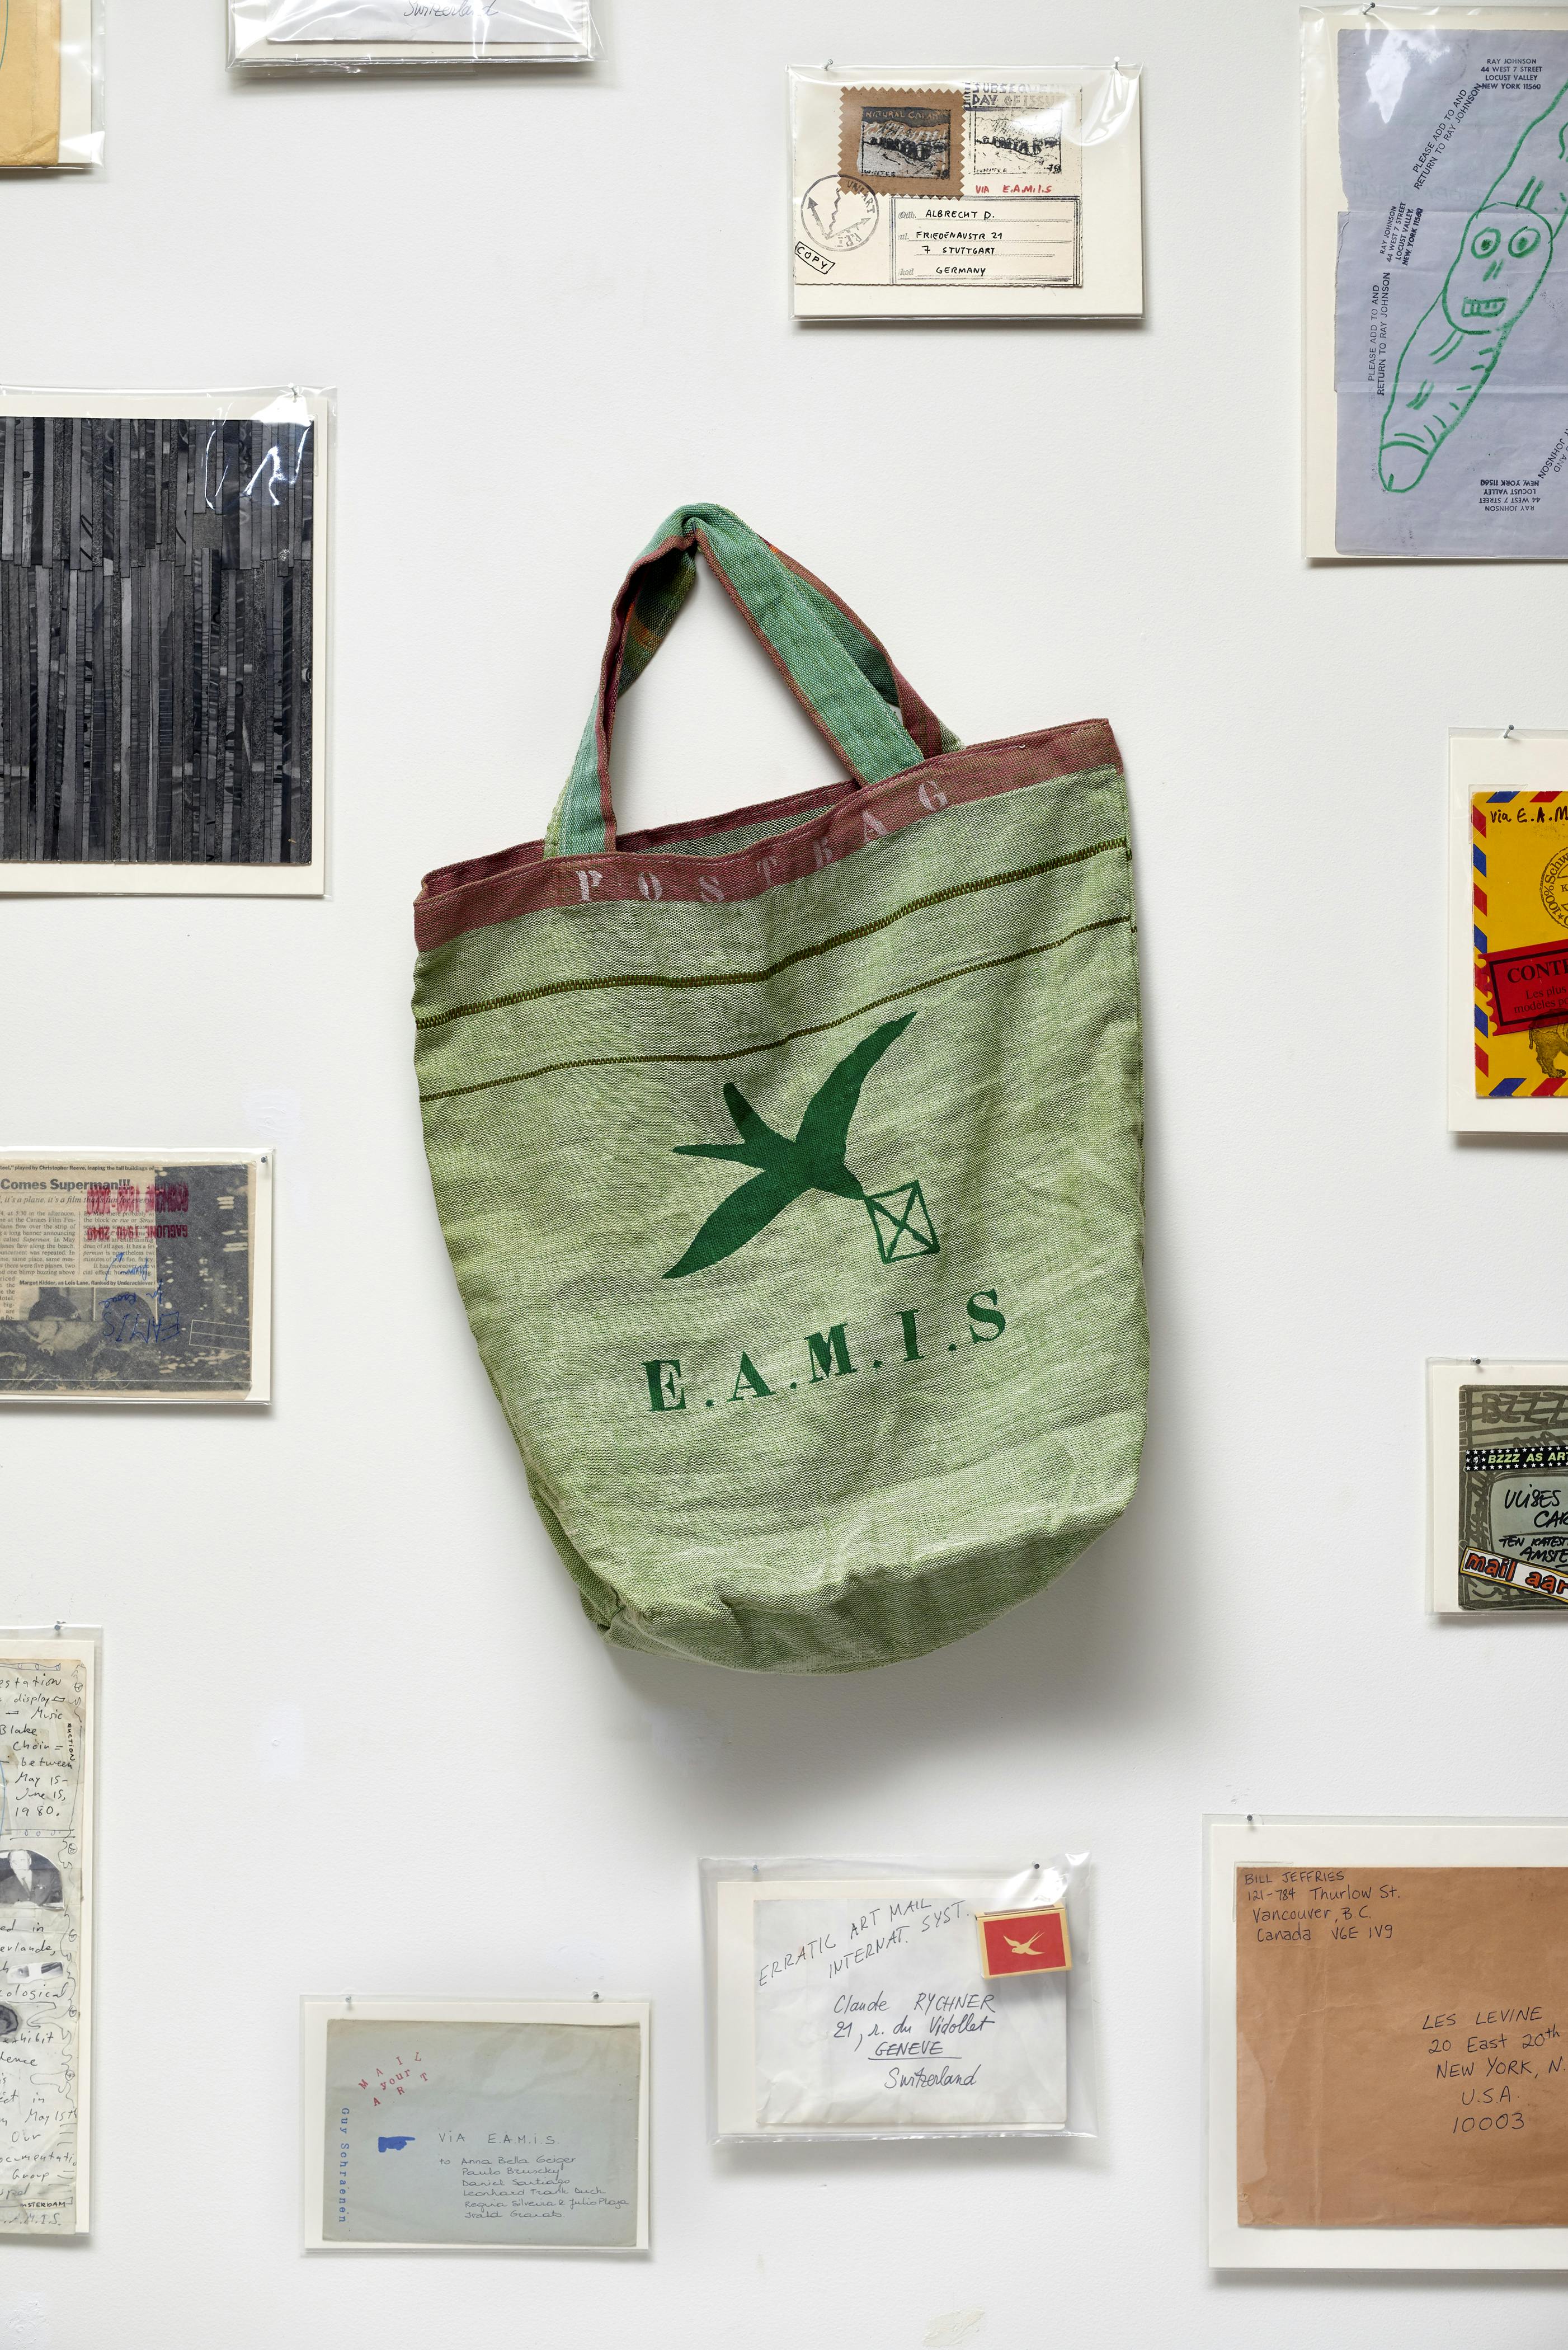 Installation view of Ulises Carrión exhibition showing a green tote bag mounted to a wall surrounded by photographs, sketches, and envelopes.